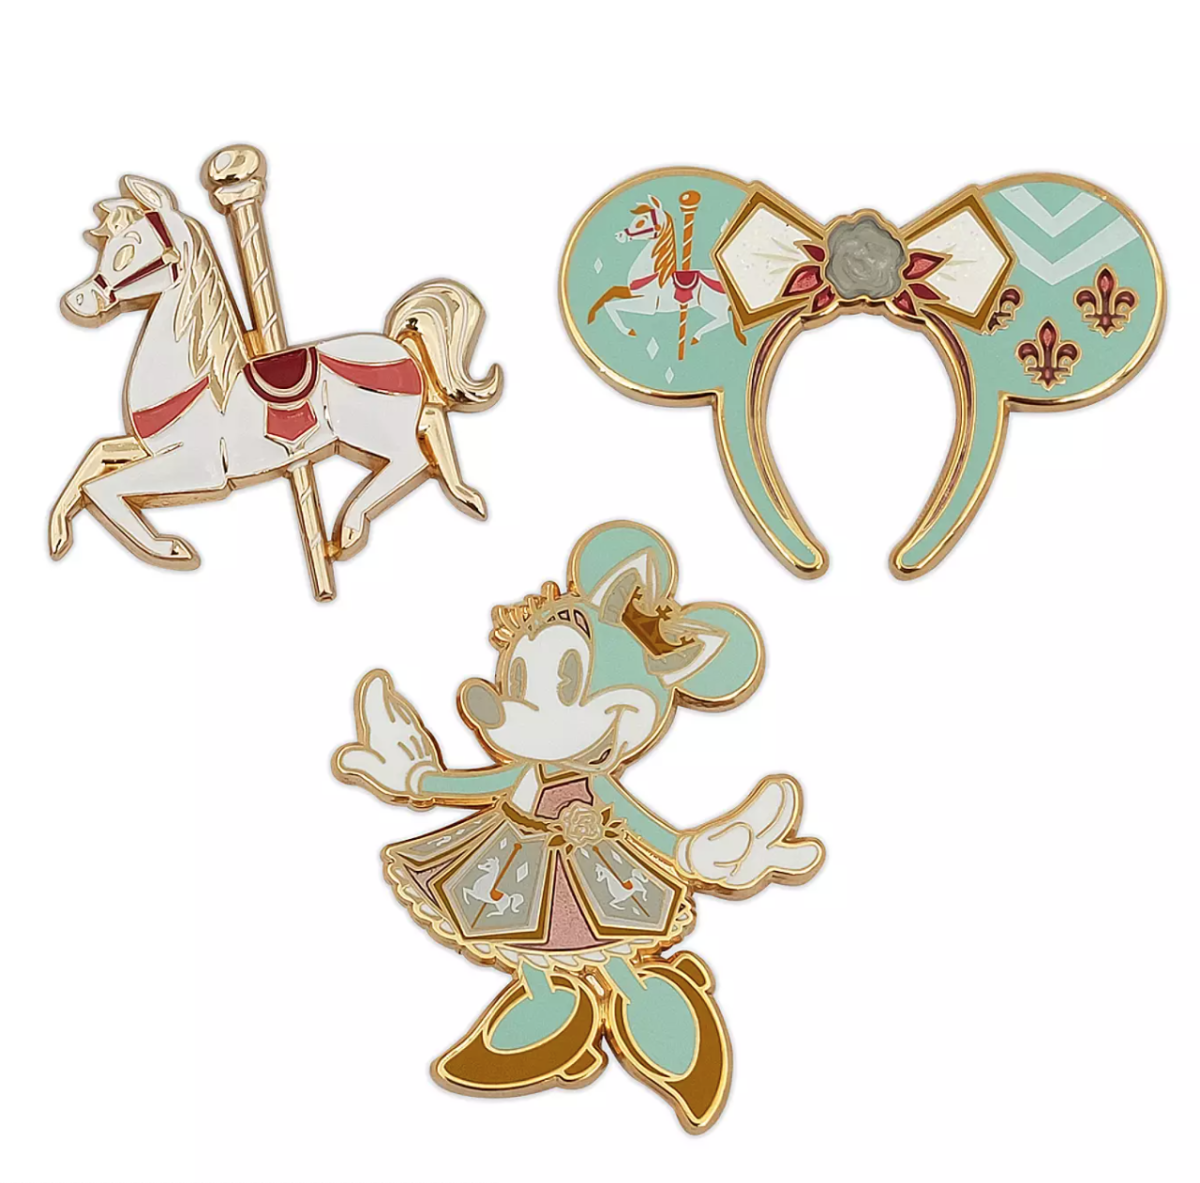 minnie-mouse-main-attraction-king-arthur-carrousel-pins-1